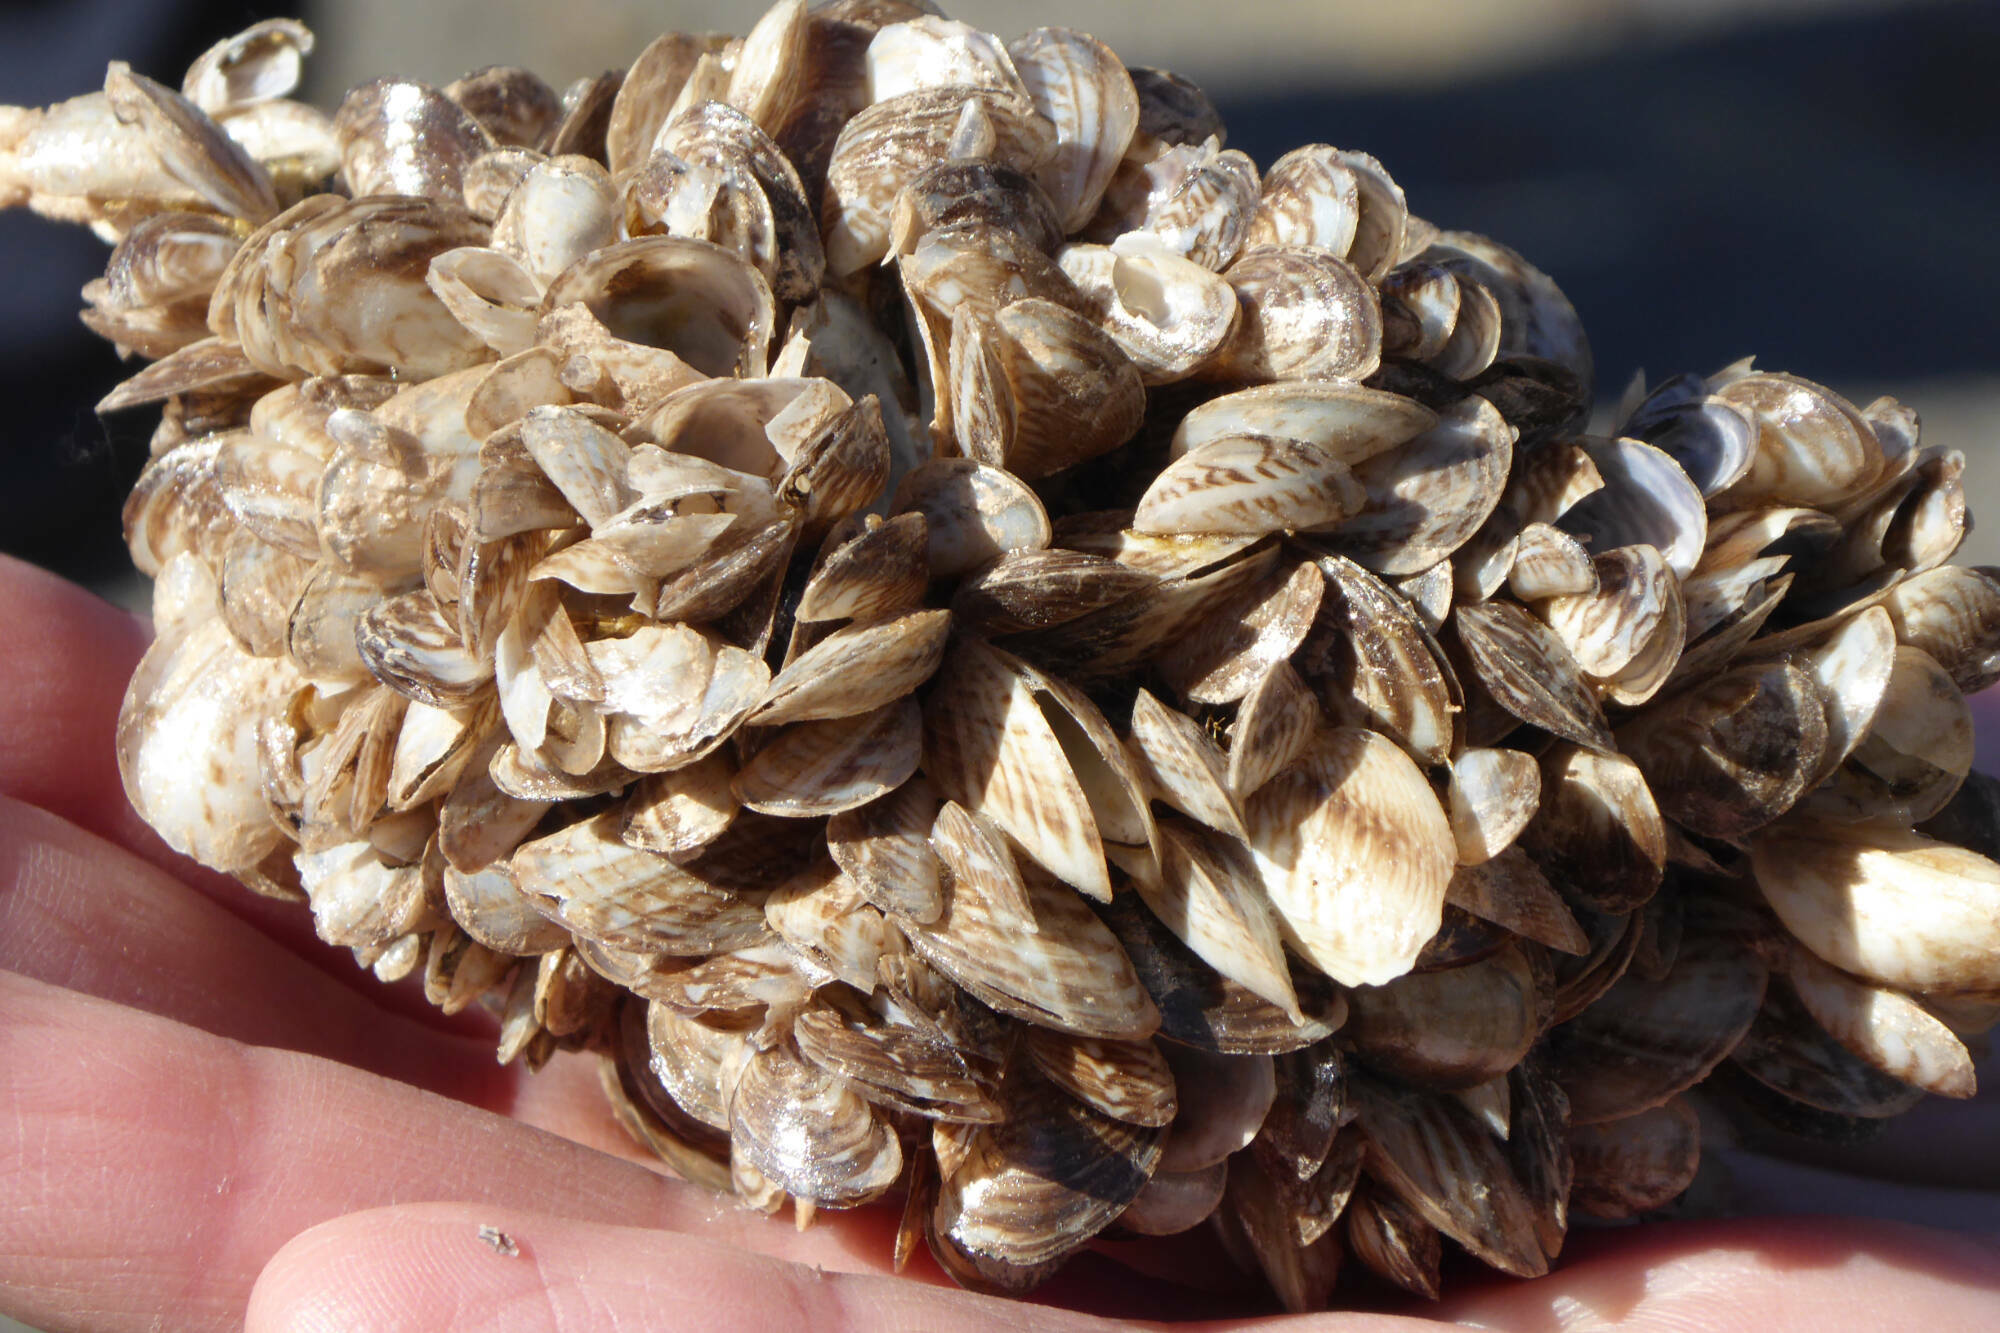 The discovery of invasive zebra and quagga mussels in Okanagan waterways continues to be a concern for the Okanagan Basin Water Board. (File photo)